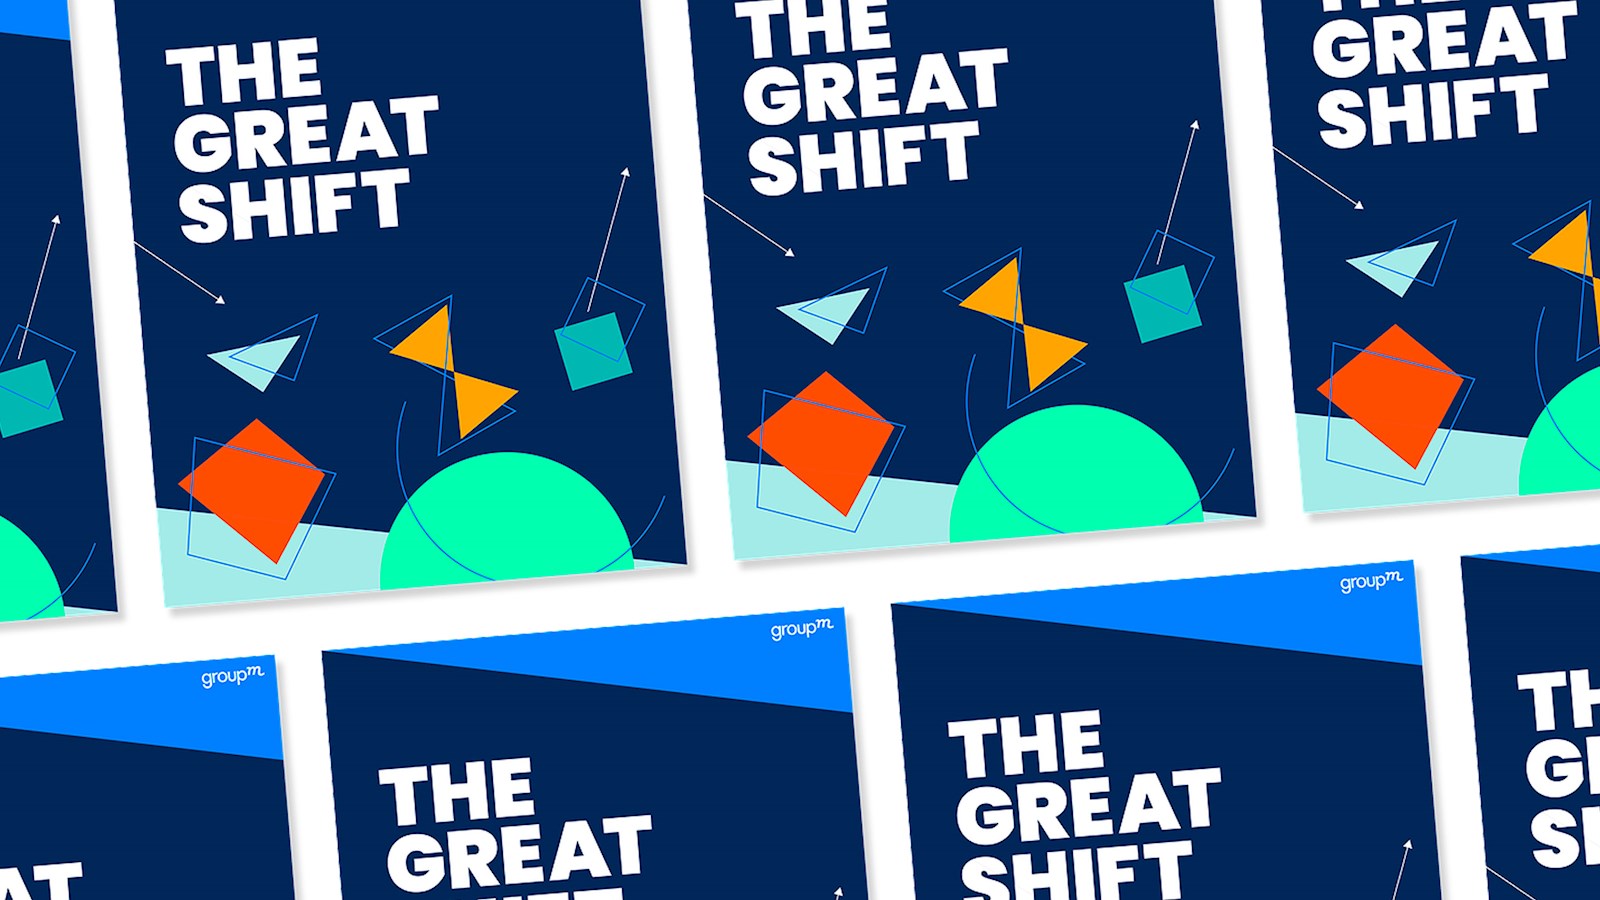 The Great Shift publication